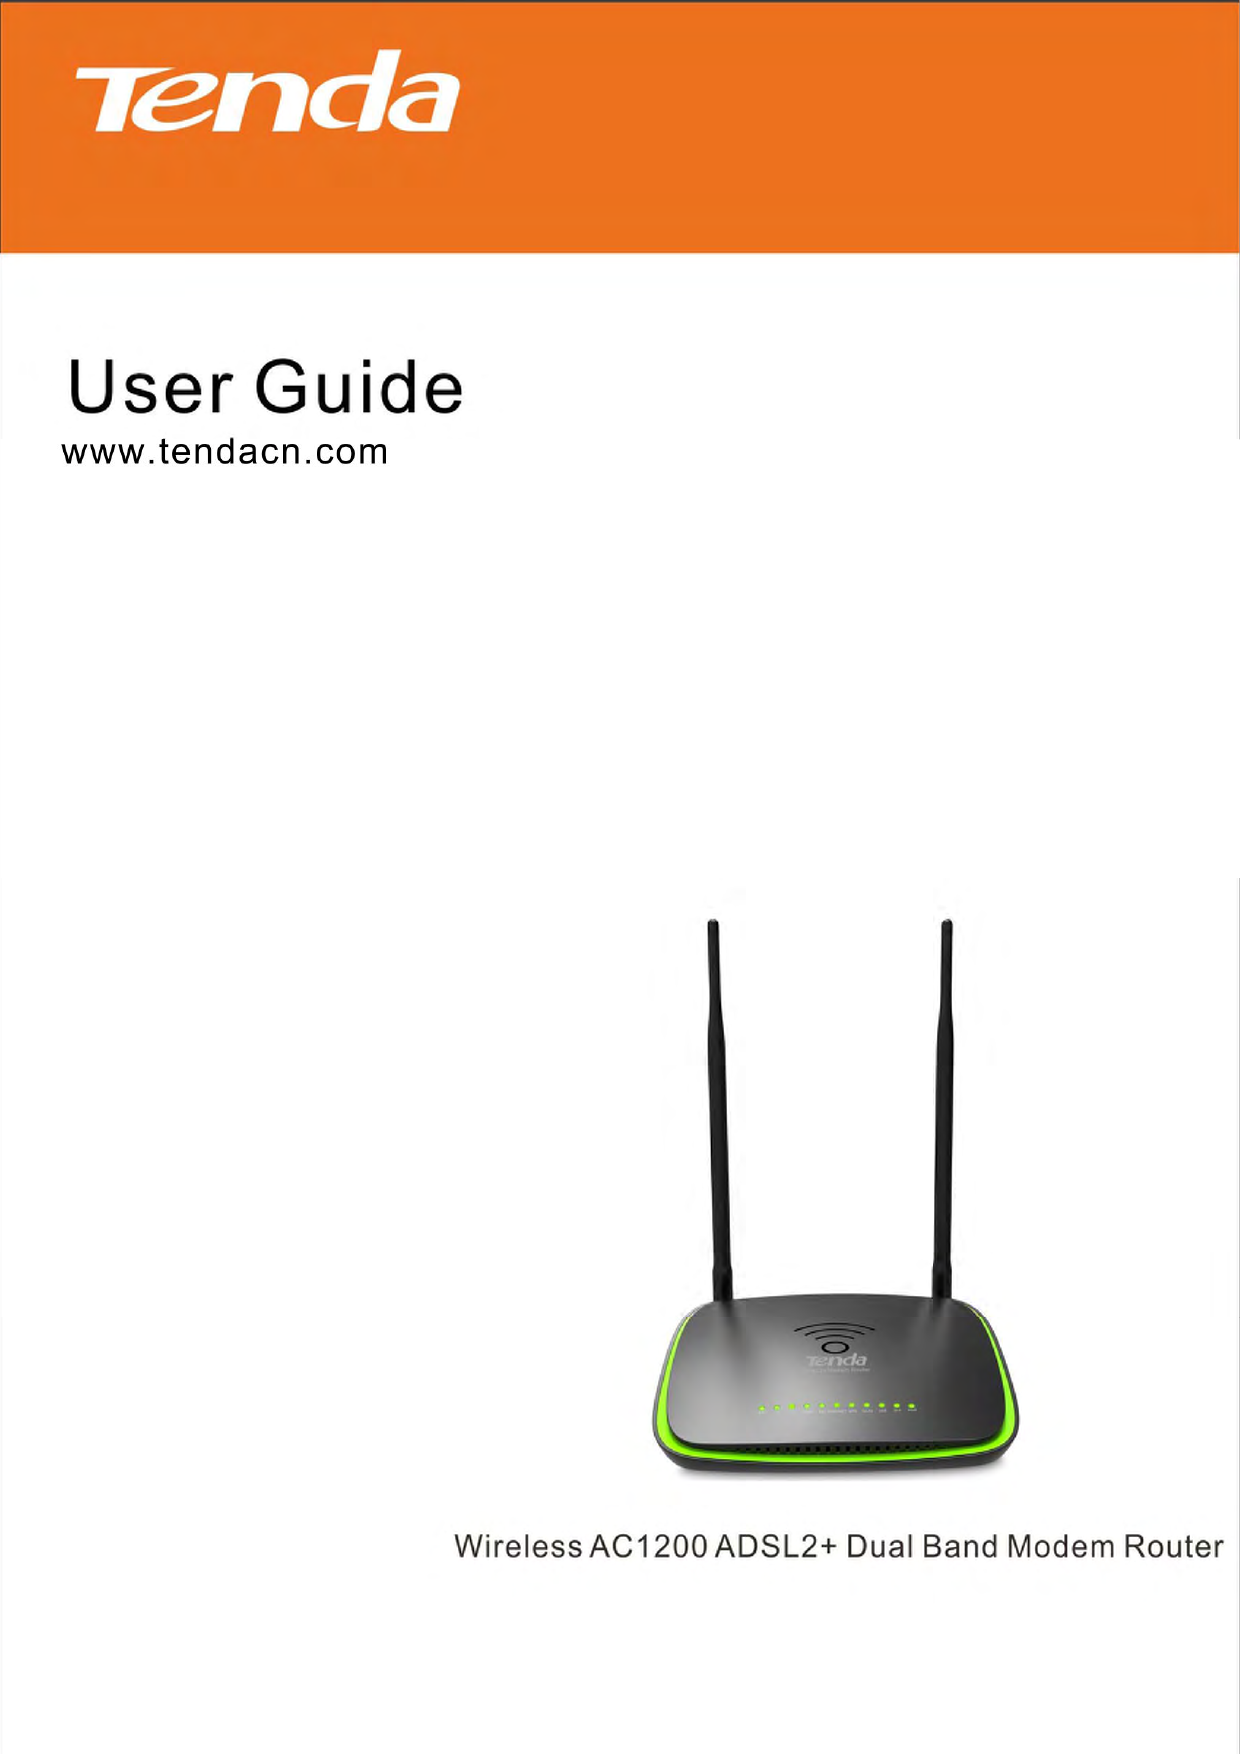                                                        Wireless AC1200 ADSL2+ Dual Band Modem Router i   